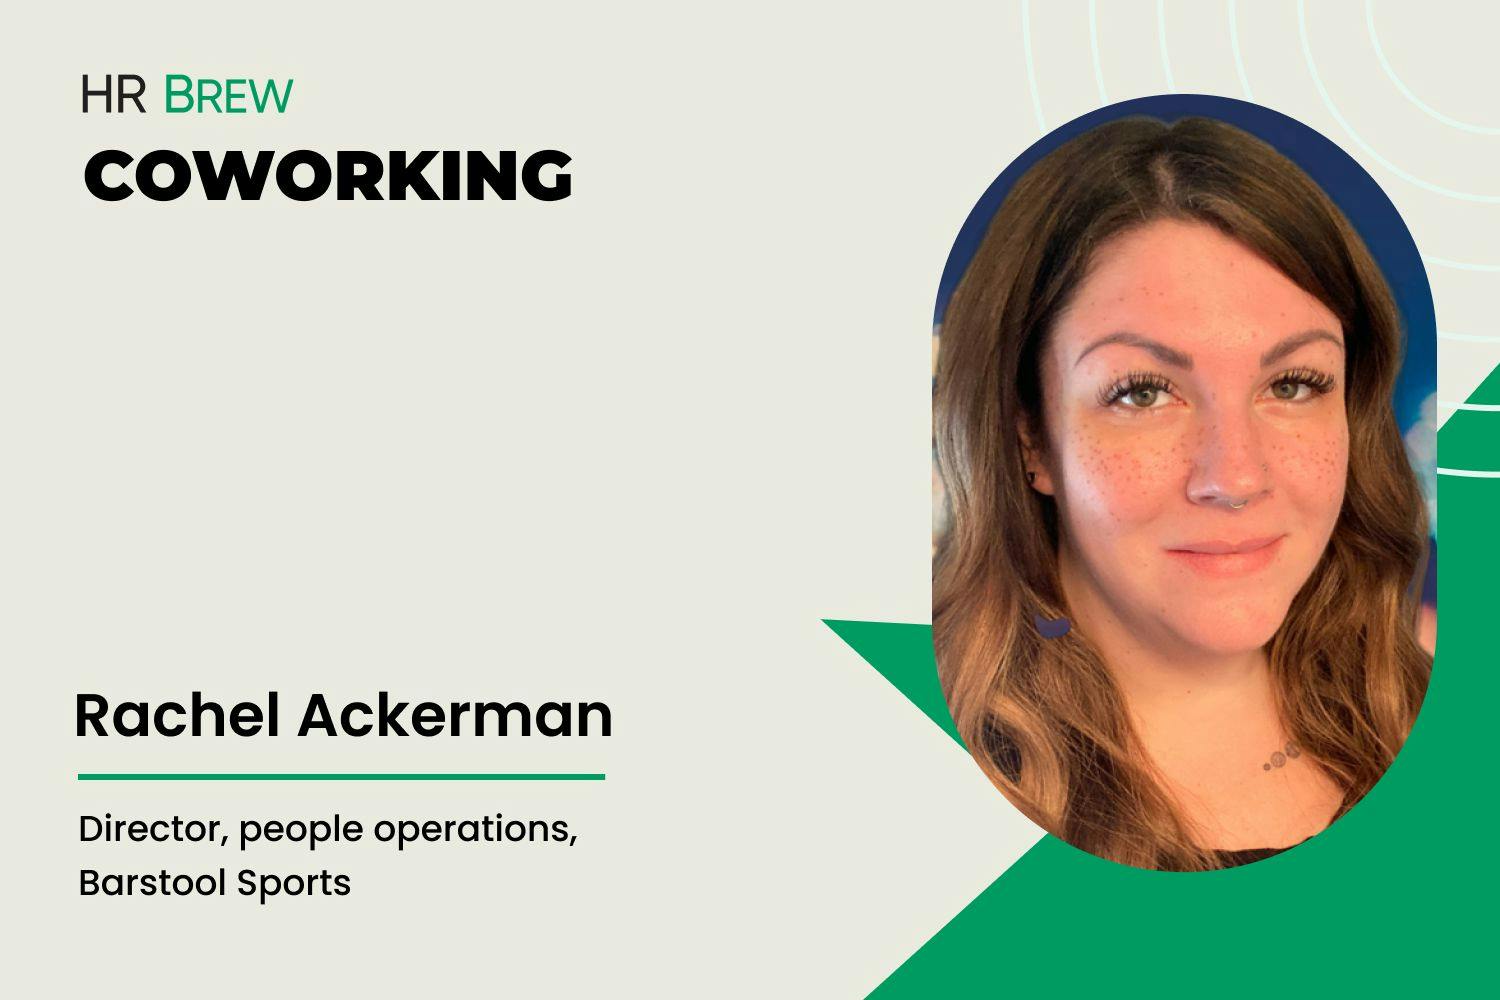 image with a headshot next to text of HR Brew Coworking, Rachel Ackerman, director, people operations, Barstool Sports